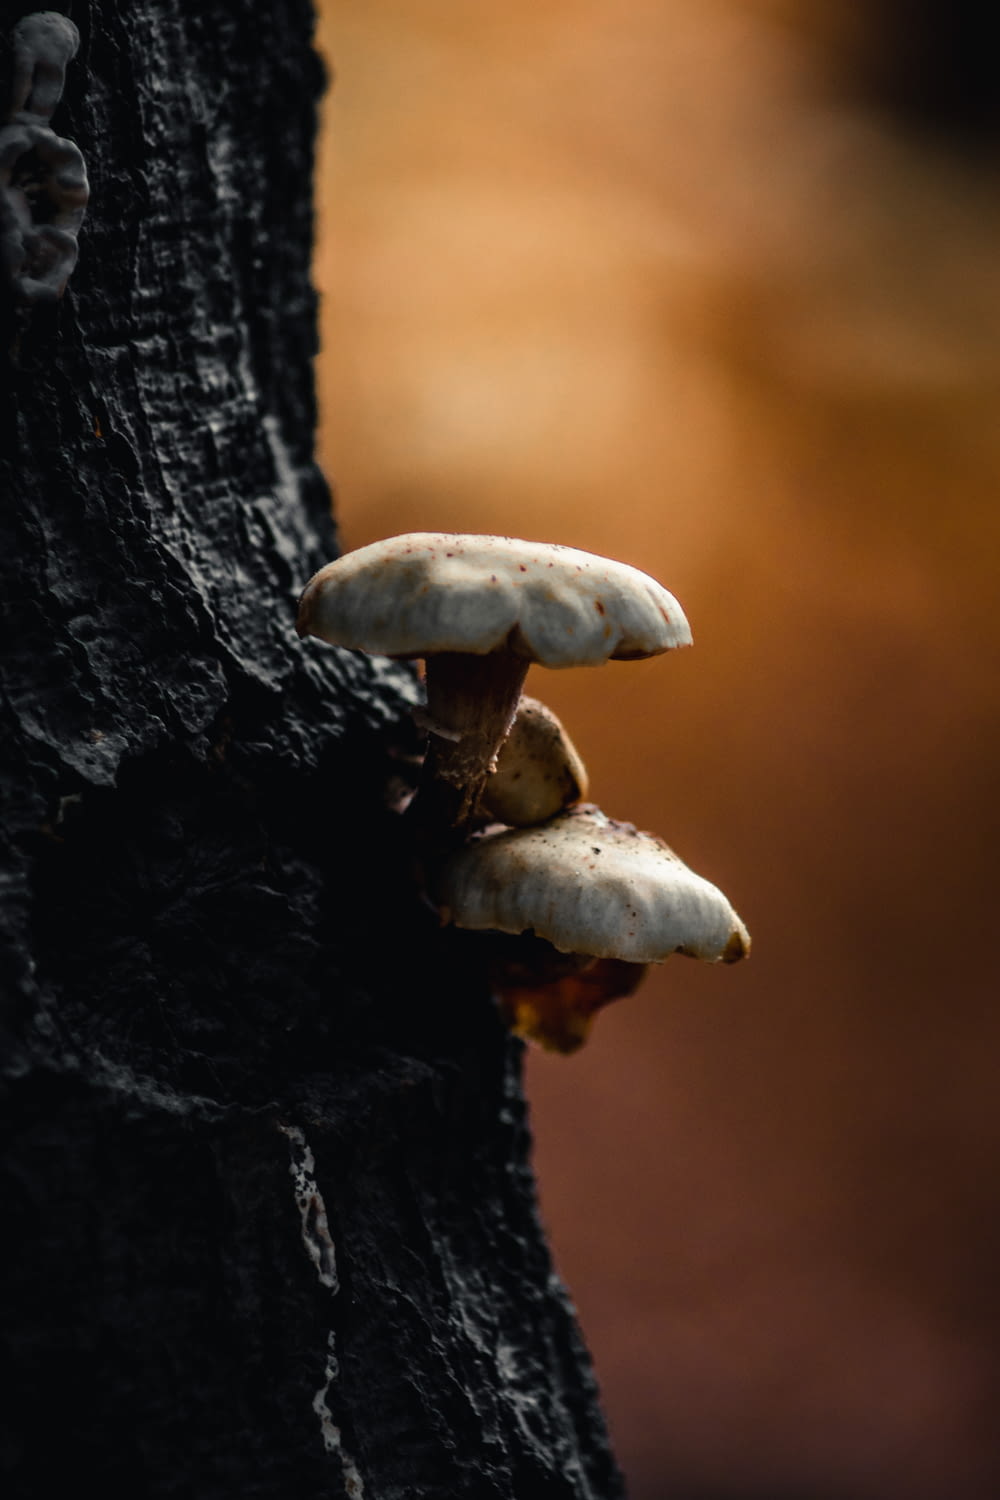 a mushroom growing out of a tree